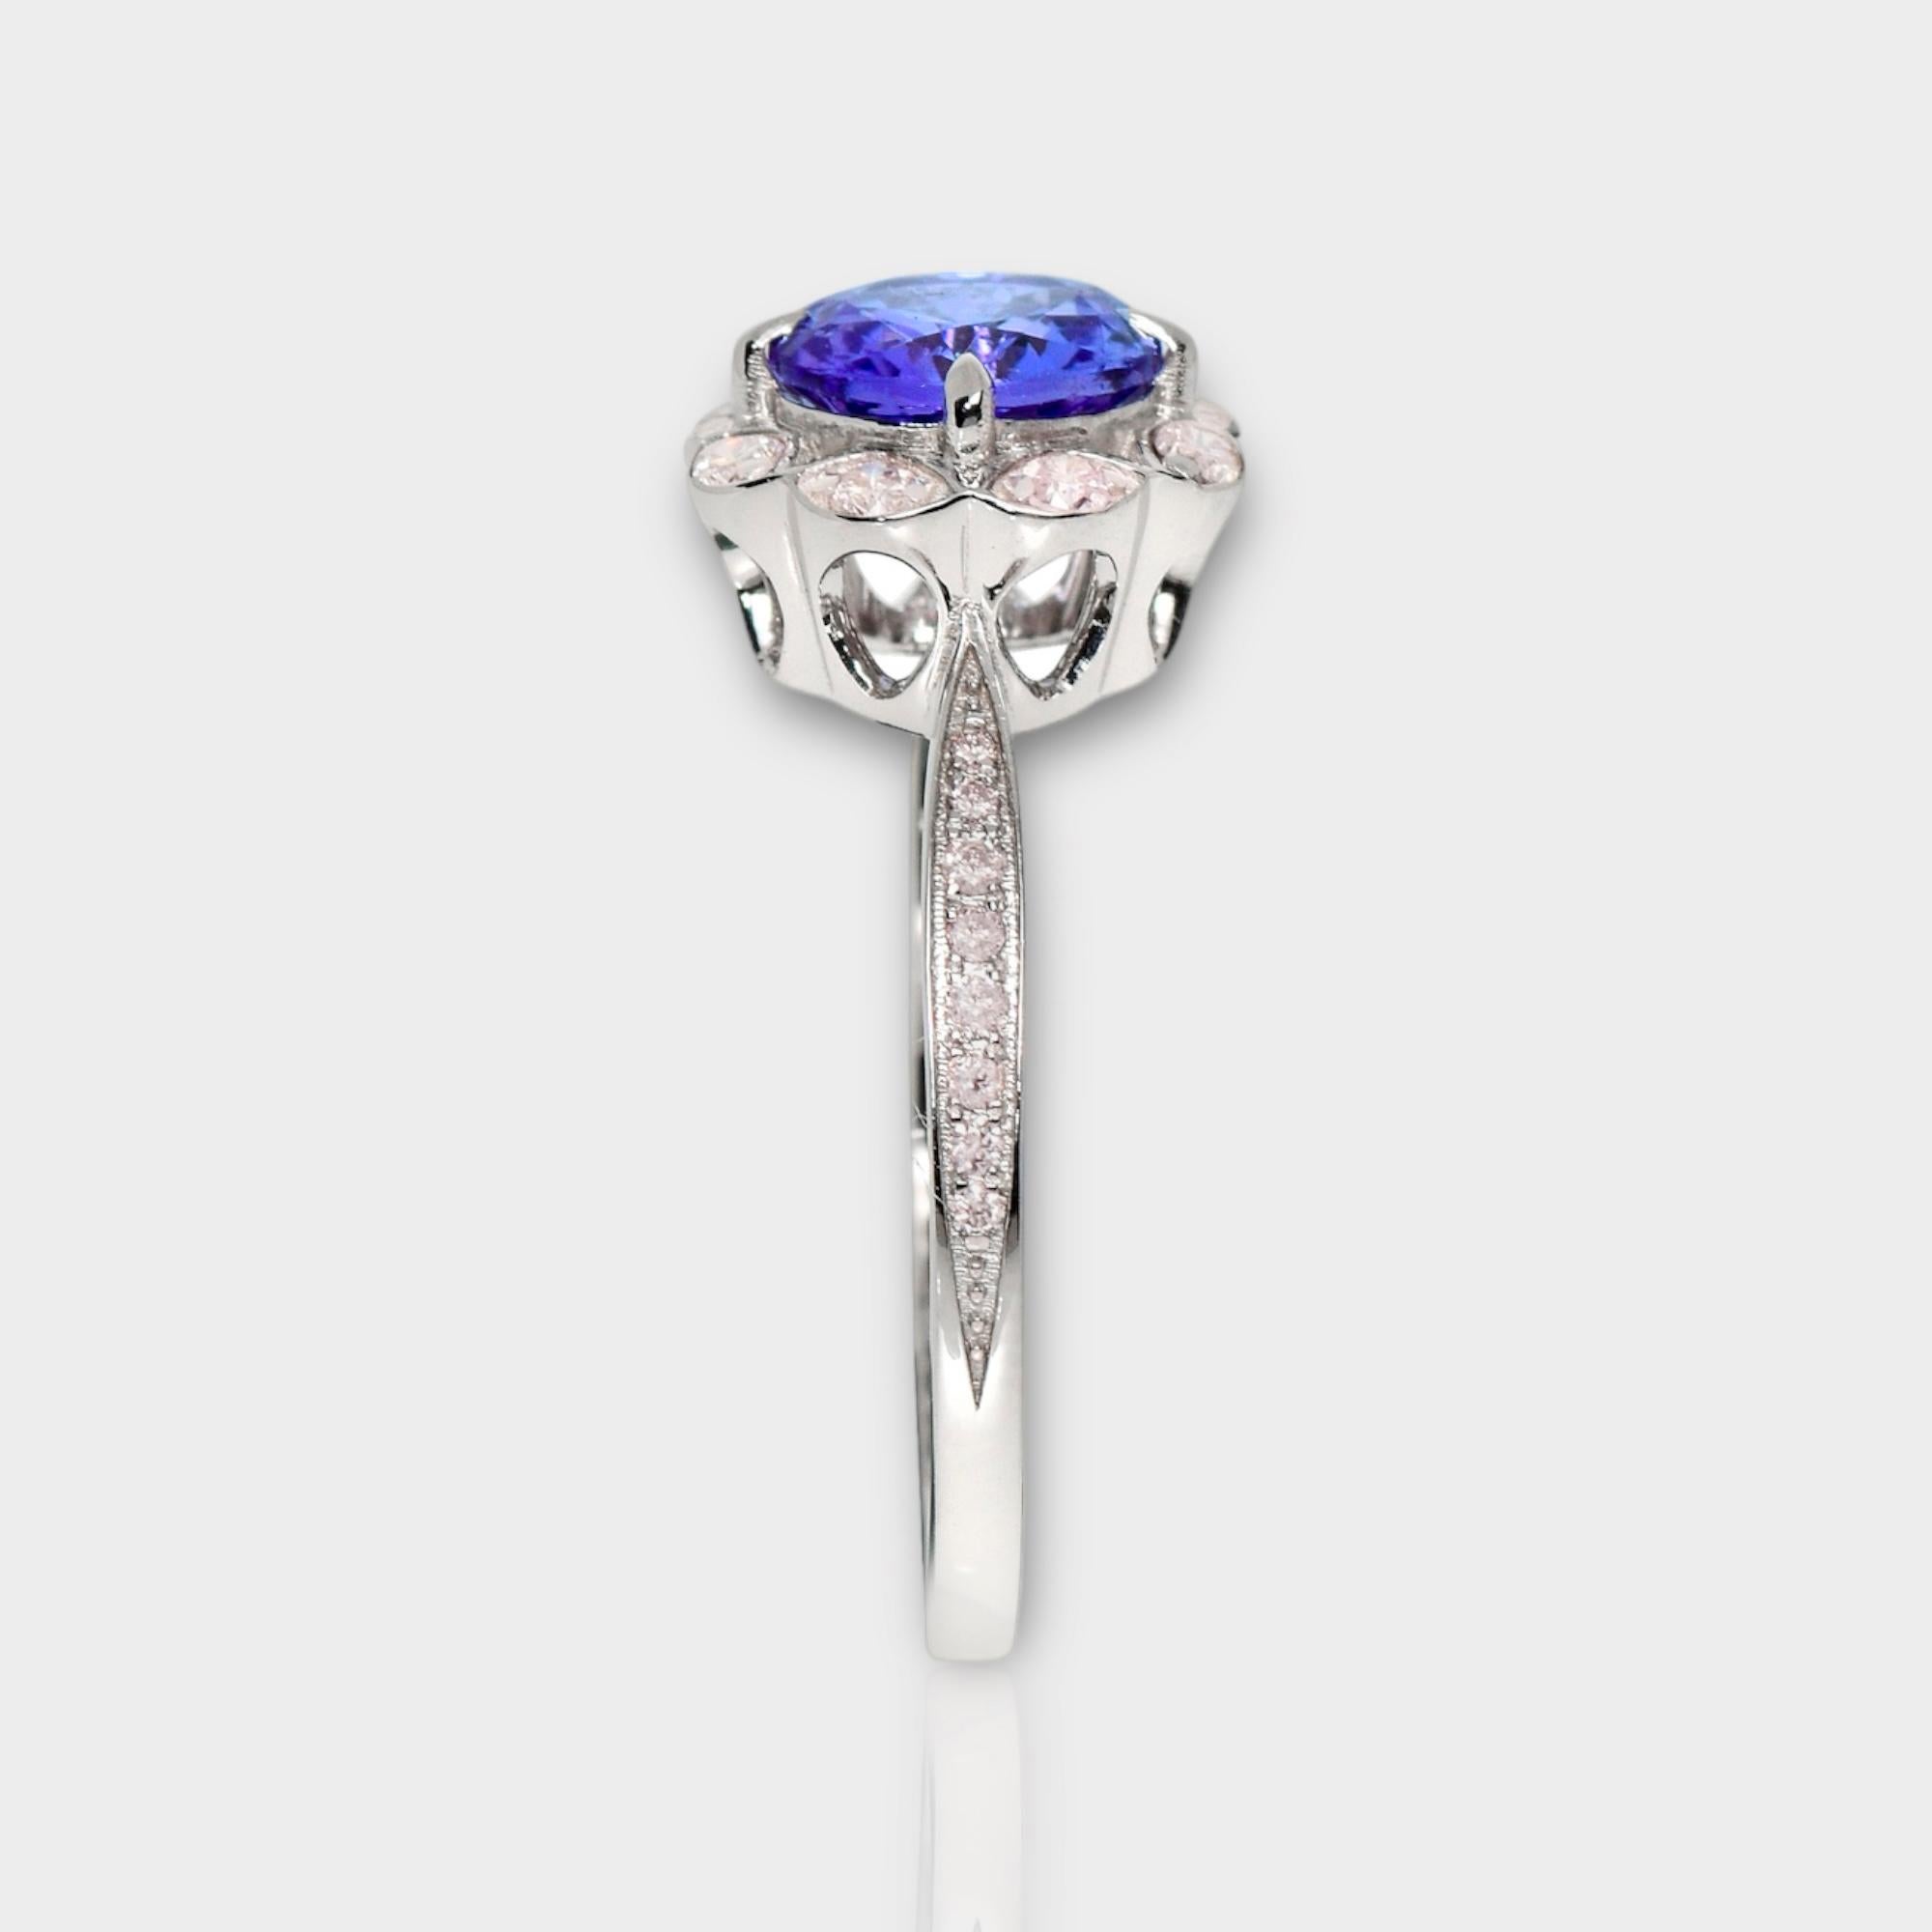 IGI 14K 1.21 ct Tanzanite&Pink Diamond Antique Art Deco Engagement Ring In New Condition For Sale In Kaohsiung City, TW